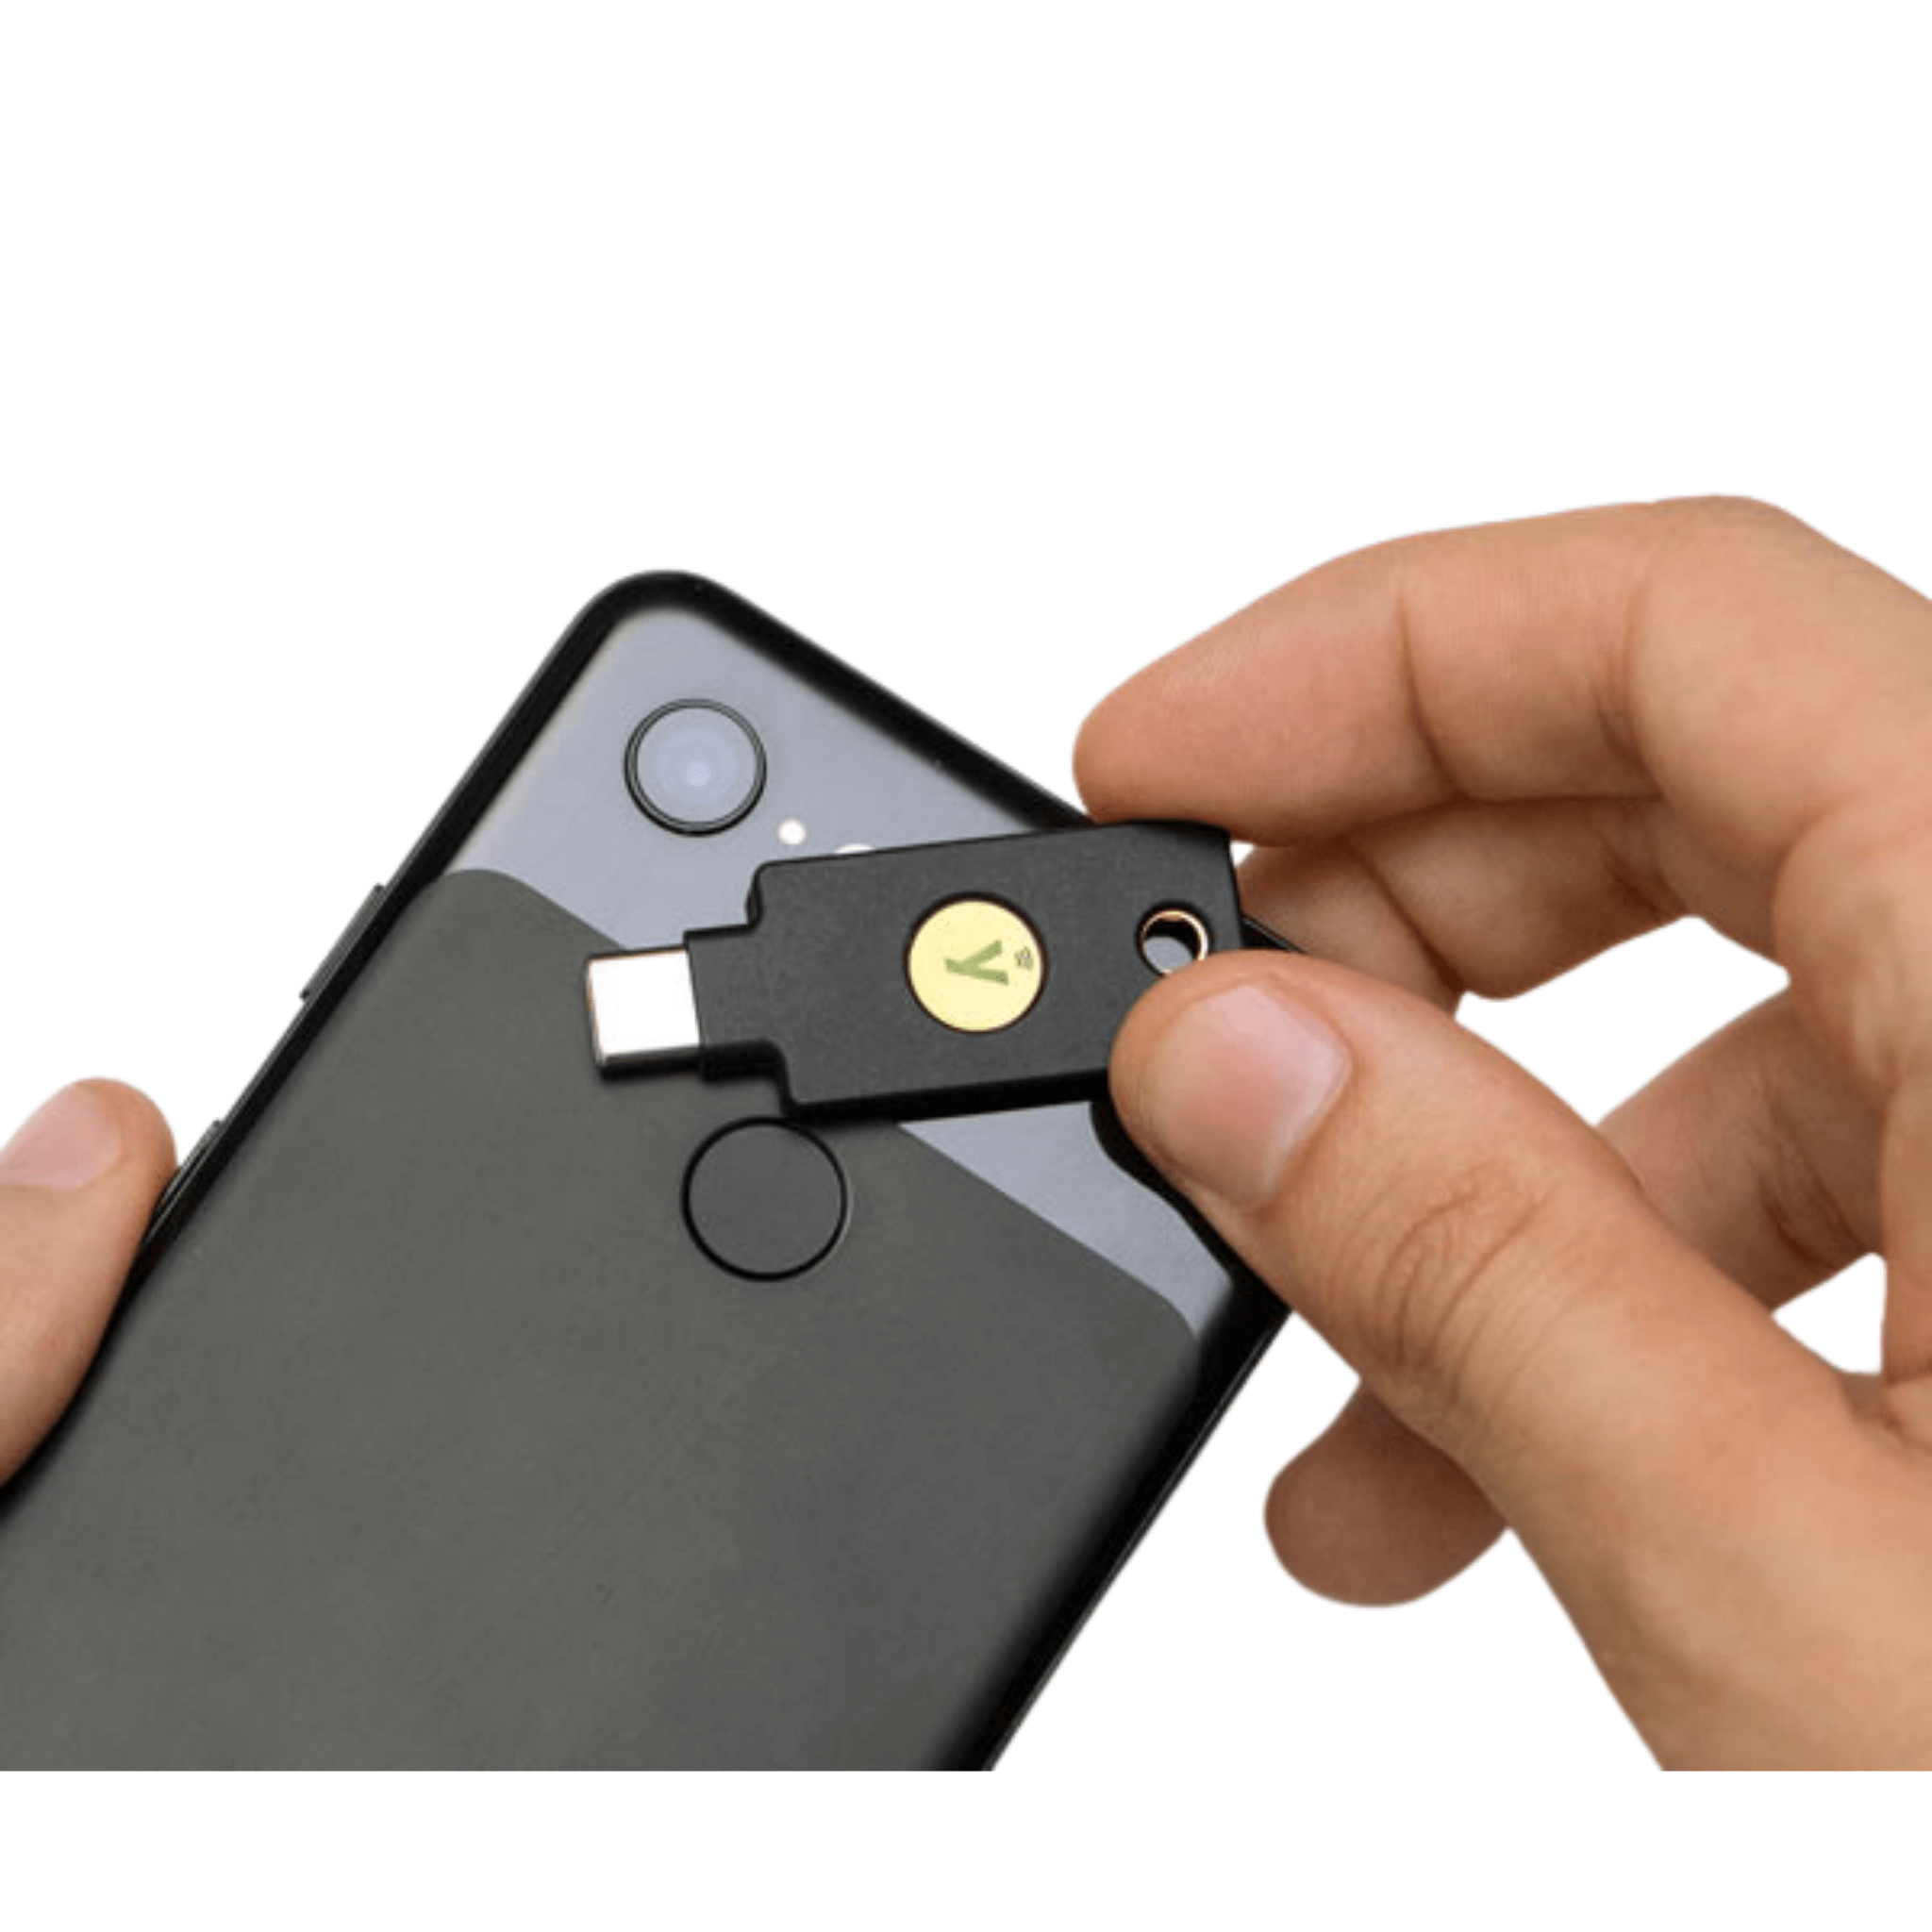 Yubico YubiKey 5C NFC Security Key Using NFC To Authenticate On A Mobile Device